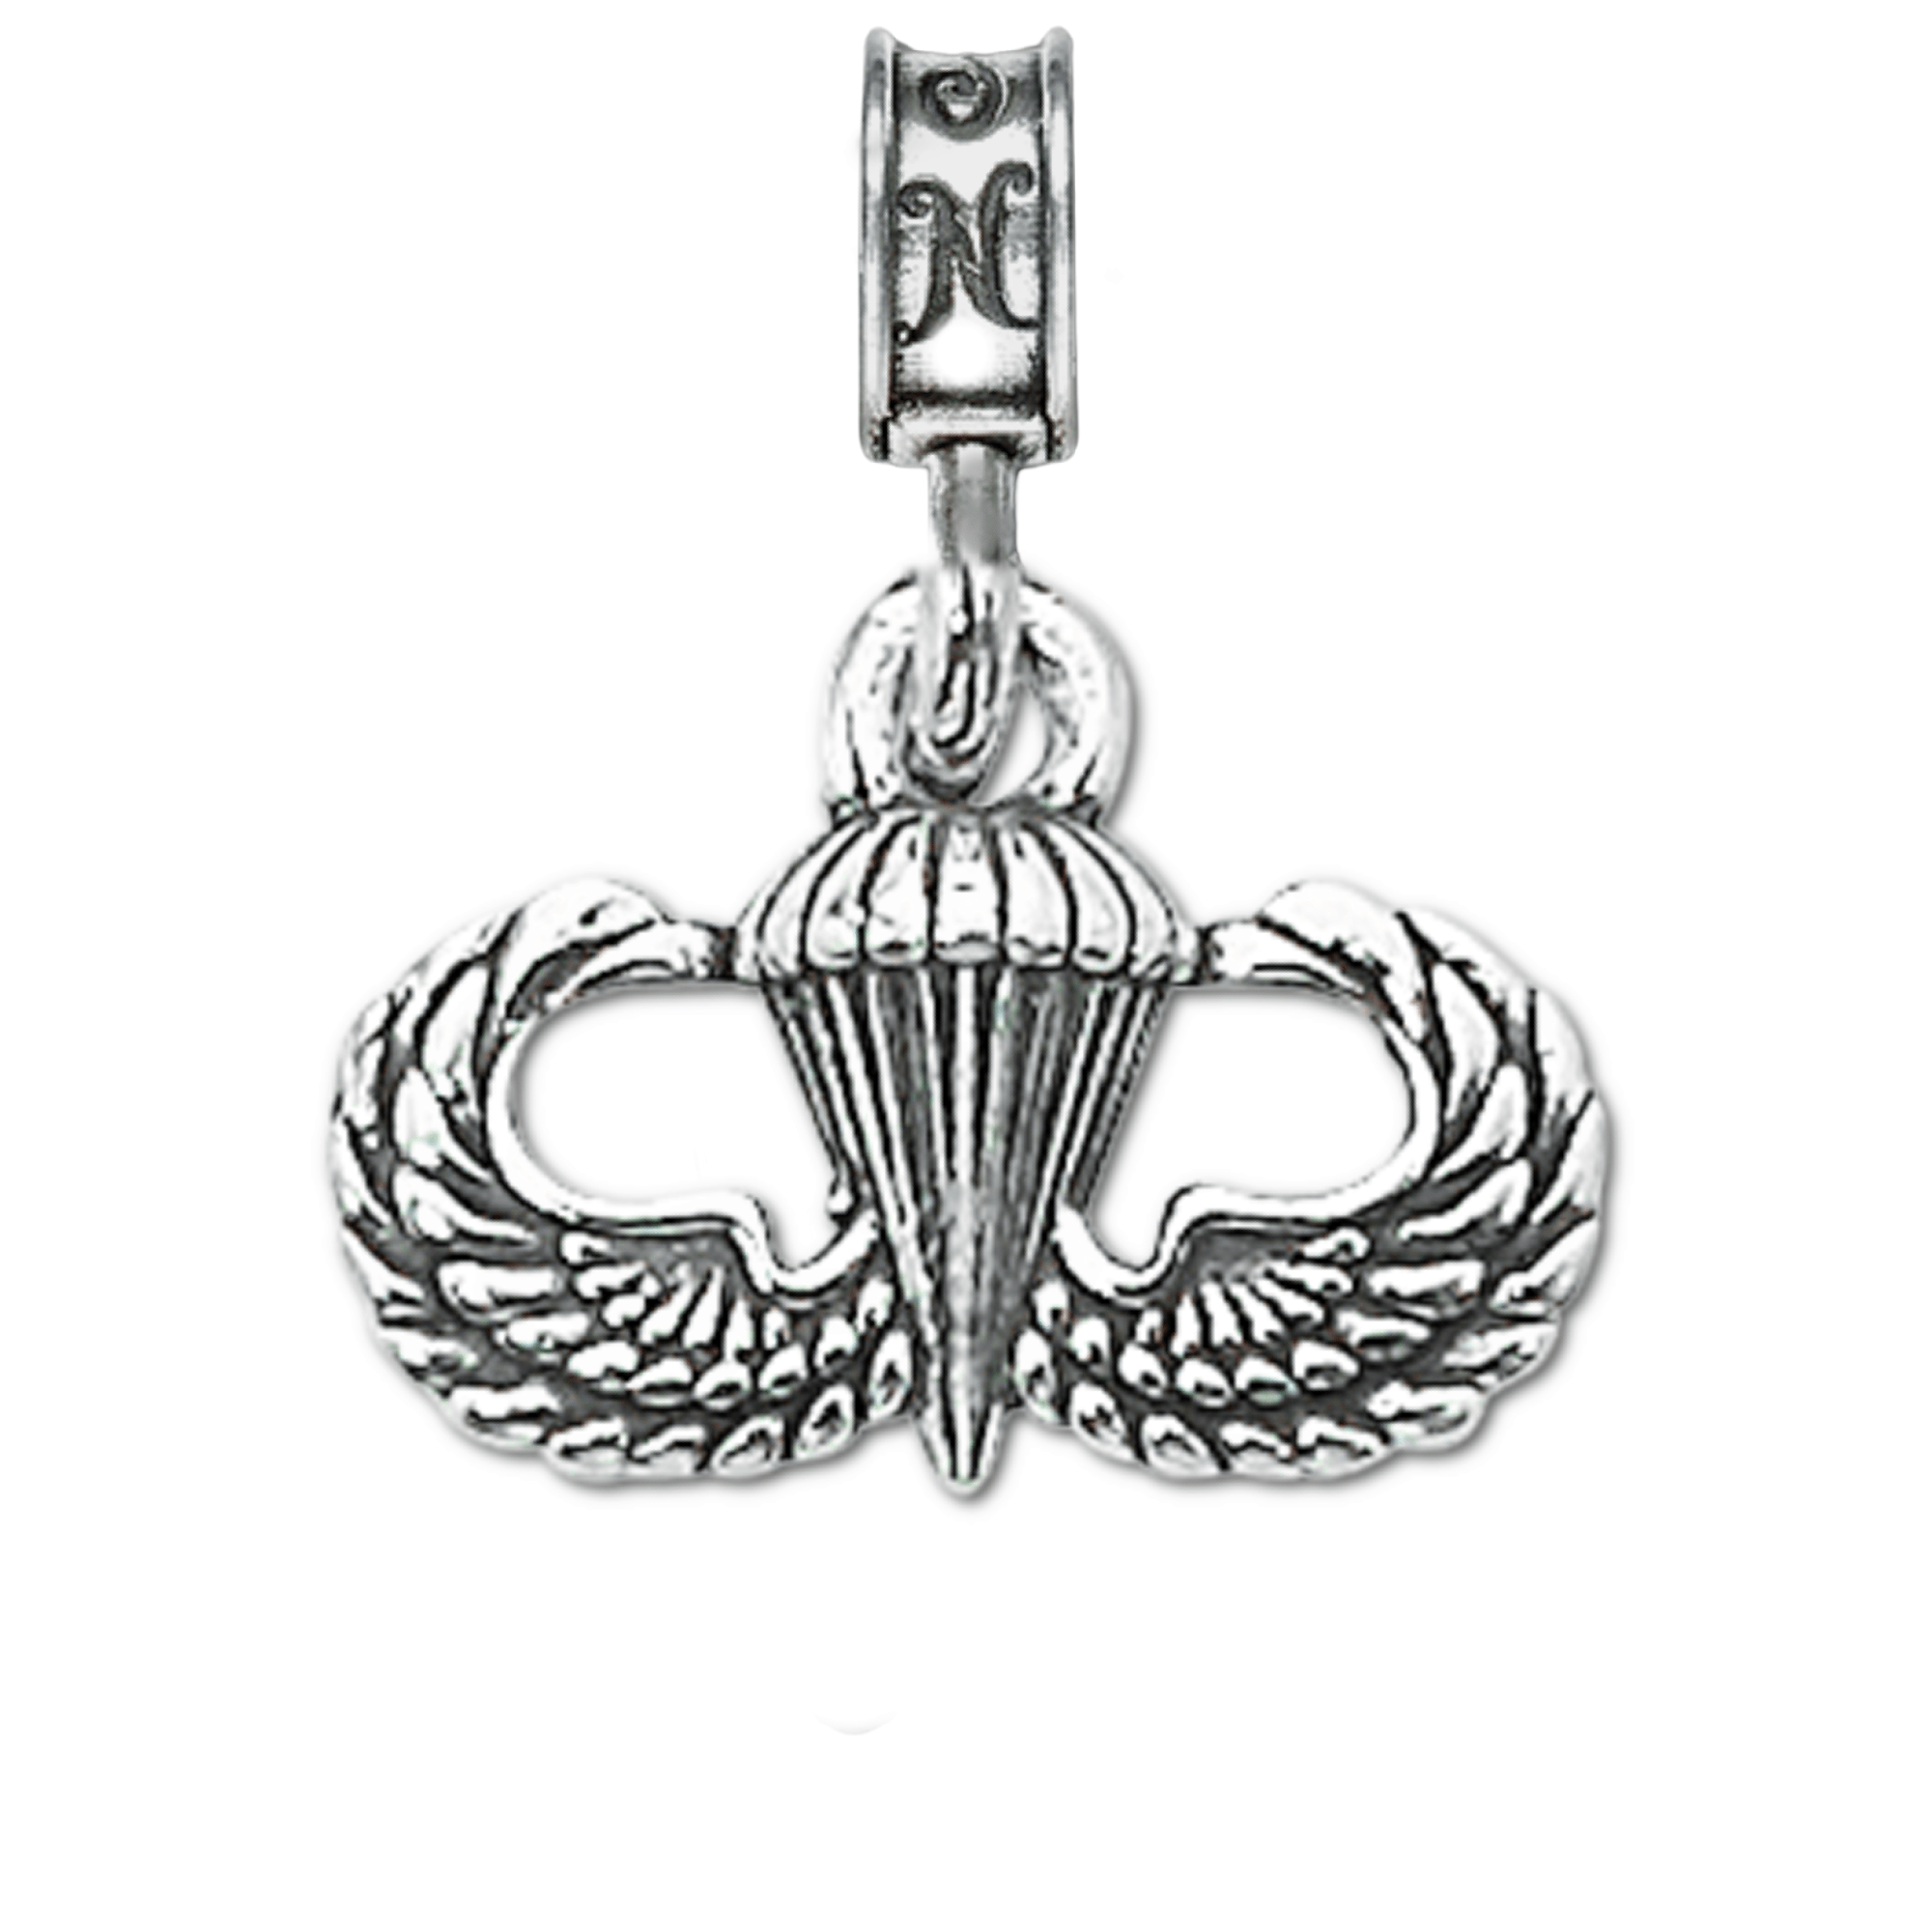 Military Jewelry, Military Charms, Military Gifts, Jump Wings Basic Charm